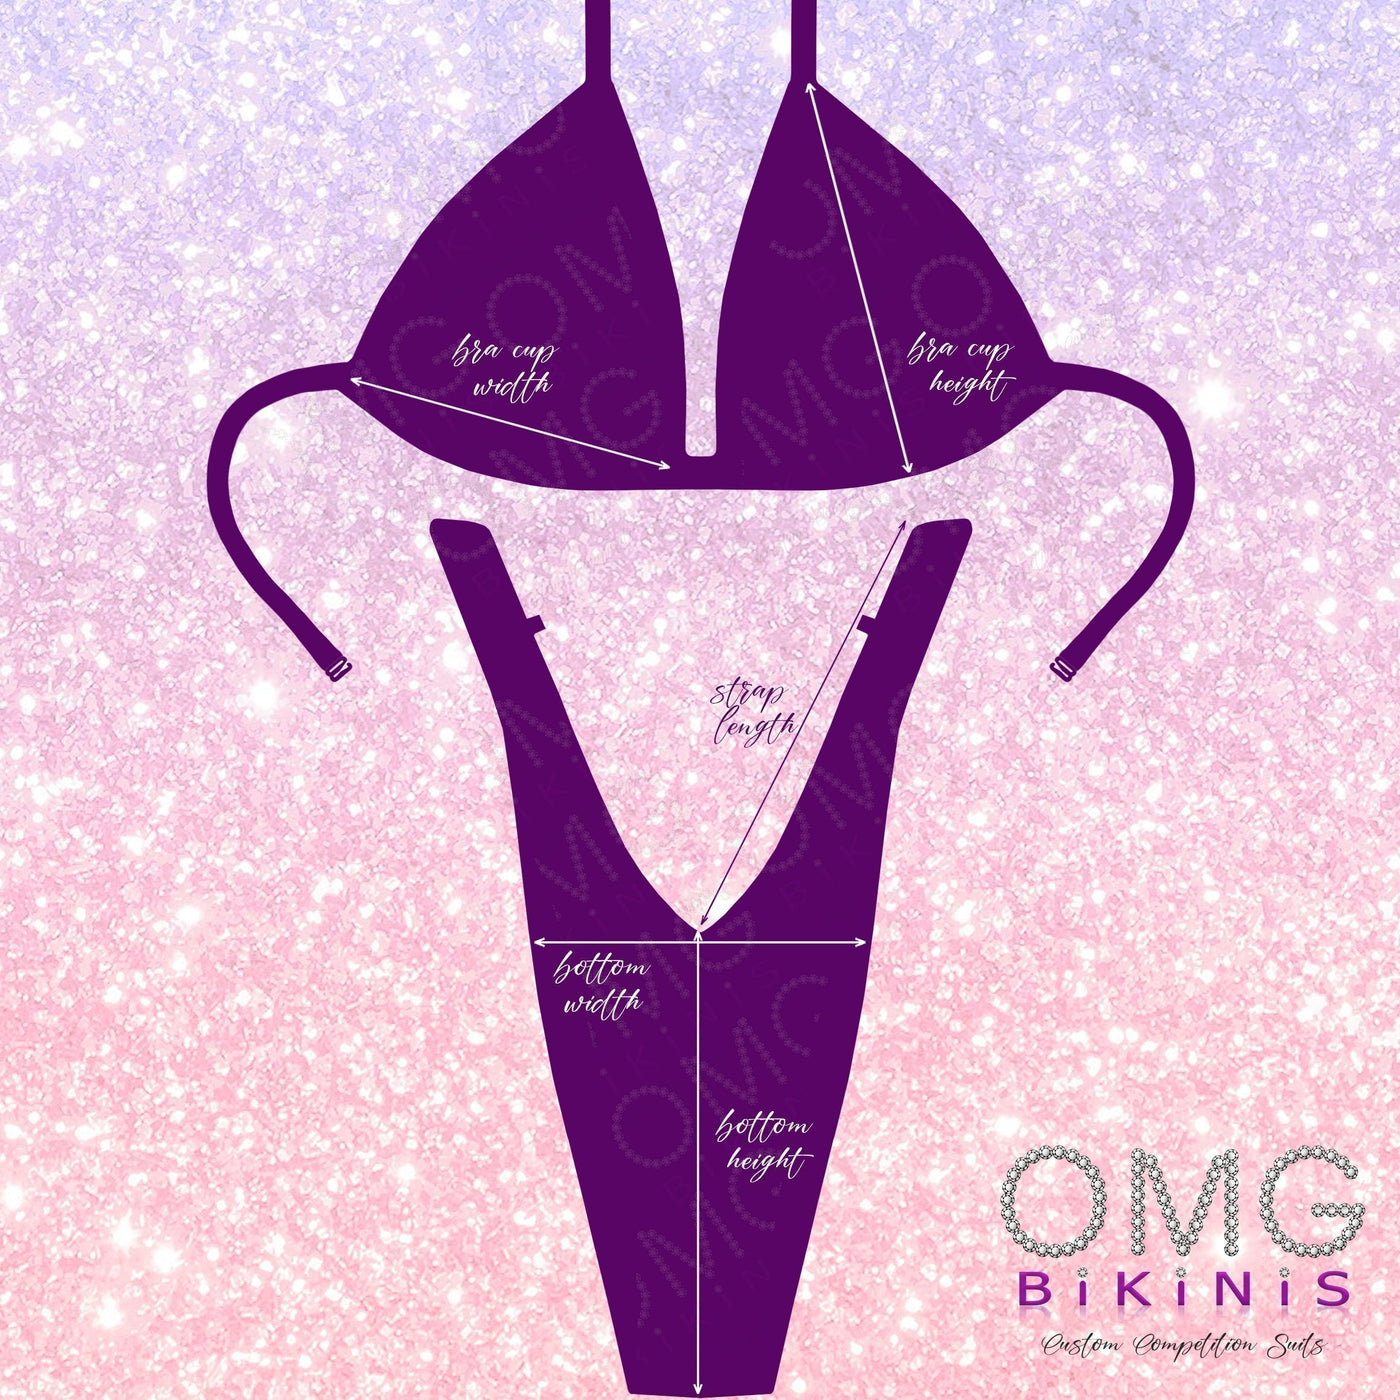 Shira Figure/WPD Competition Suit S/S | OMG Bikinis Rentals